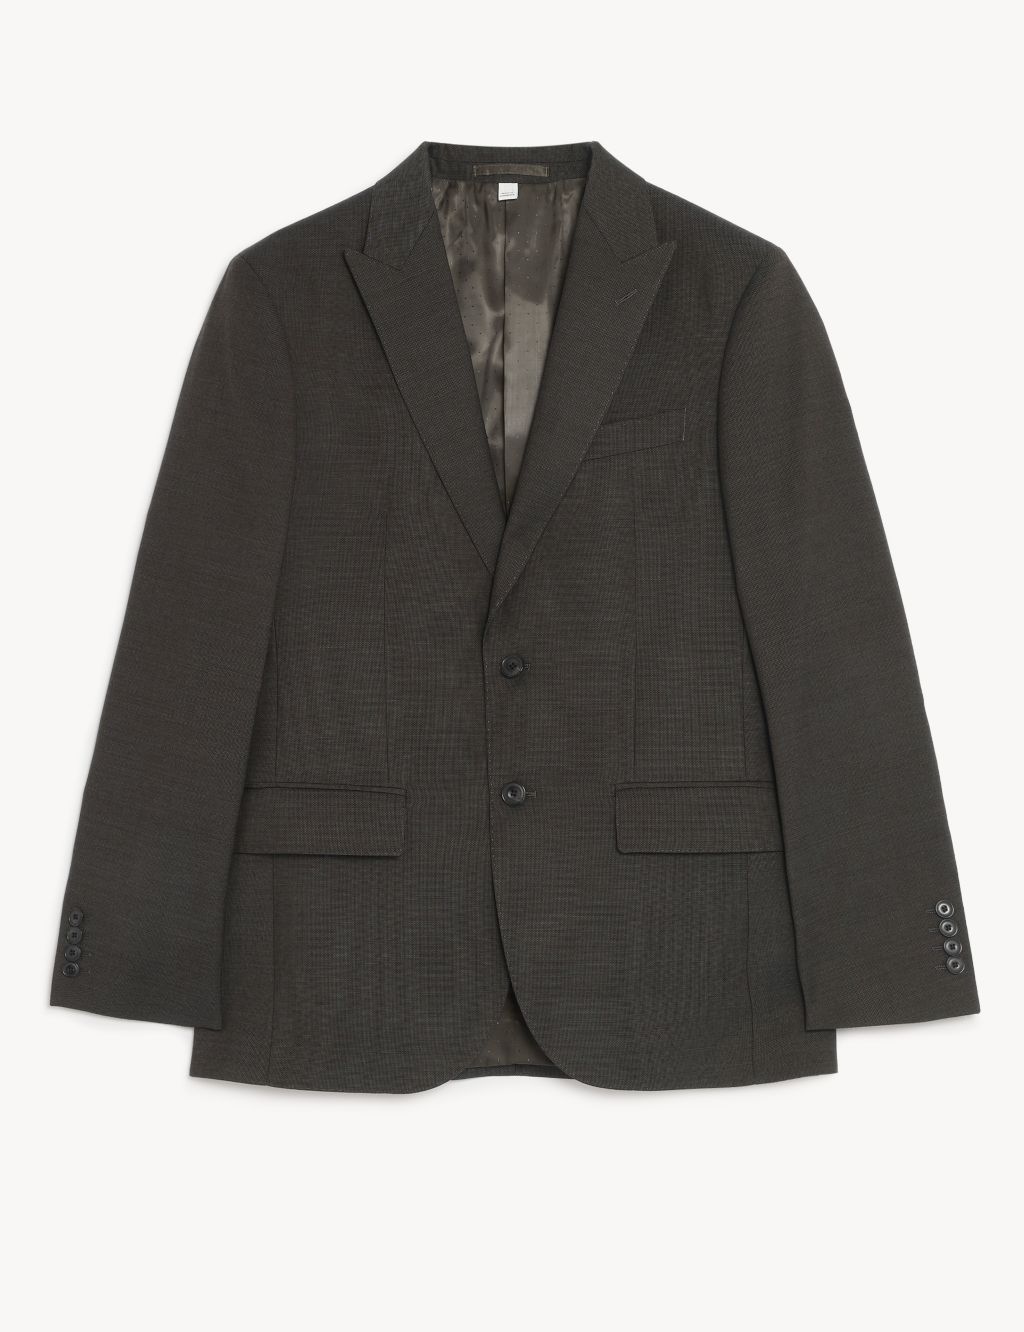 Tailored Fit Pure Wool Textured Suit Jacket image 2